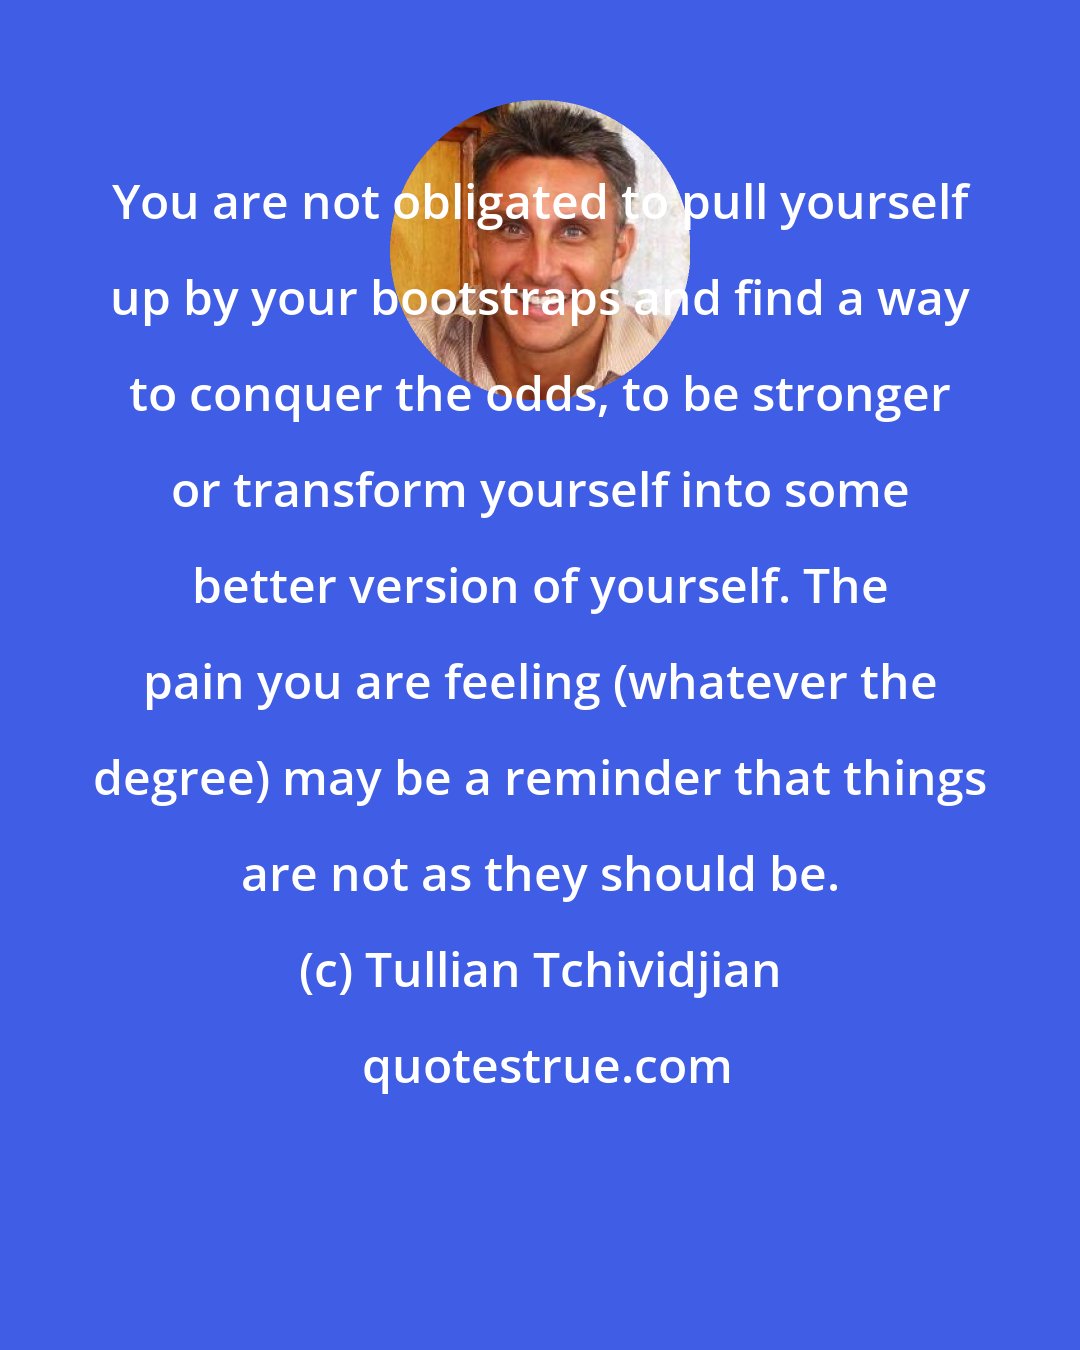 Tullian Tchividjian: You are not obligated to pull yourself up by your bootstraps and find a way to conquer the odds, to be stronger or transform yourself into some better version of yourself. The pain you are feeling (whatever the degree) may be a reminder that things are not as they should be.